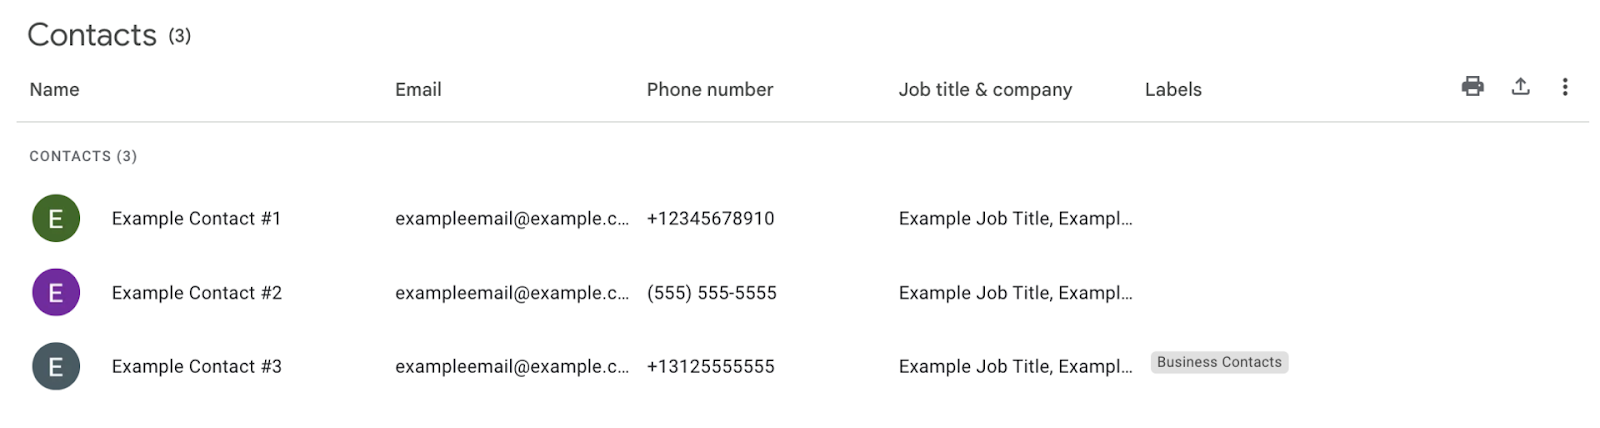 Contact list in Google Contacts